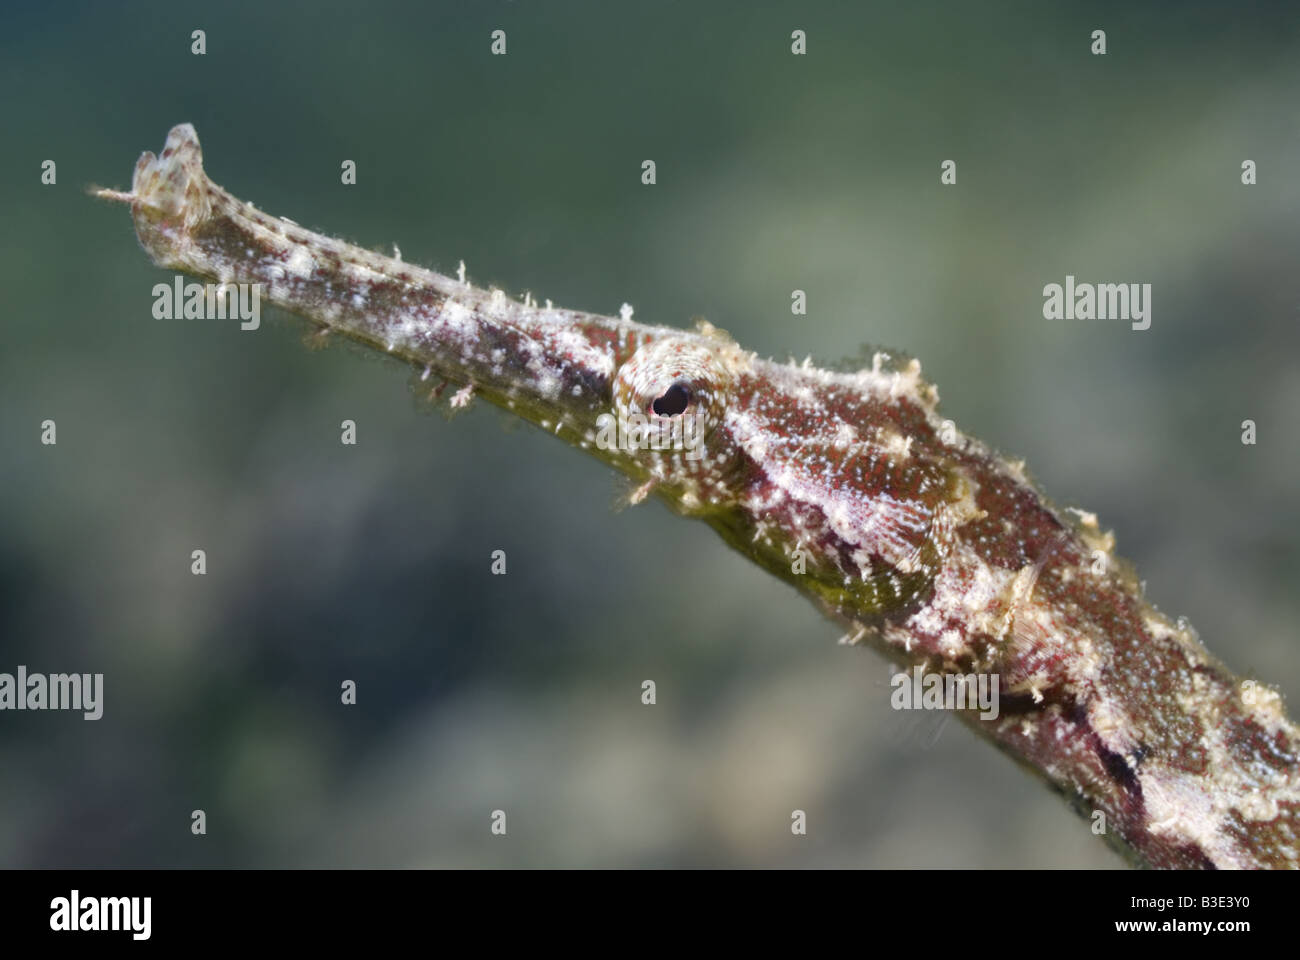 Pipefish face under water Stock Photo